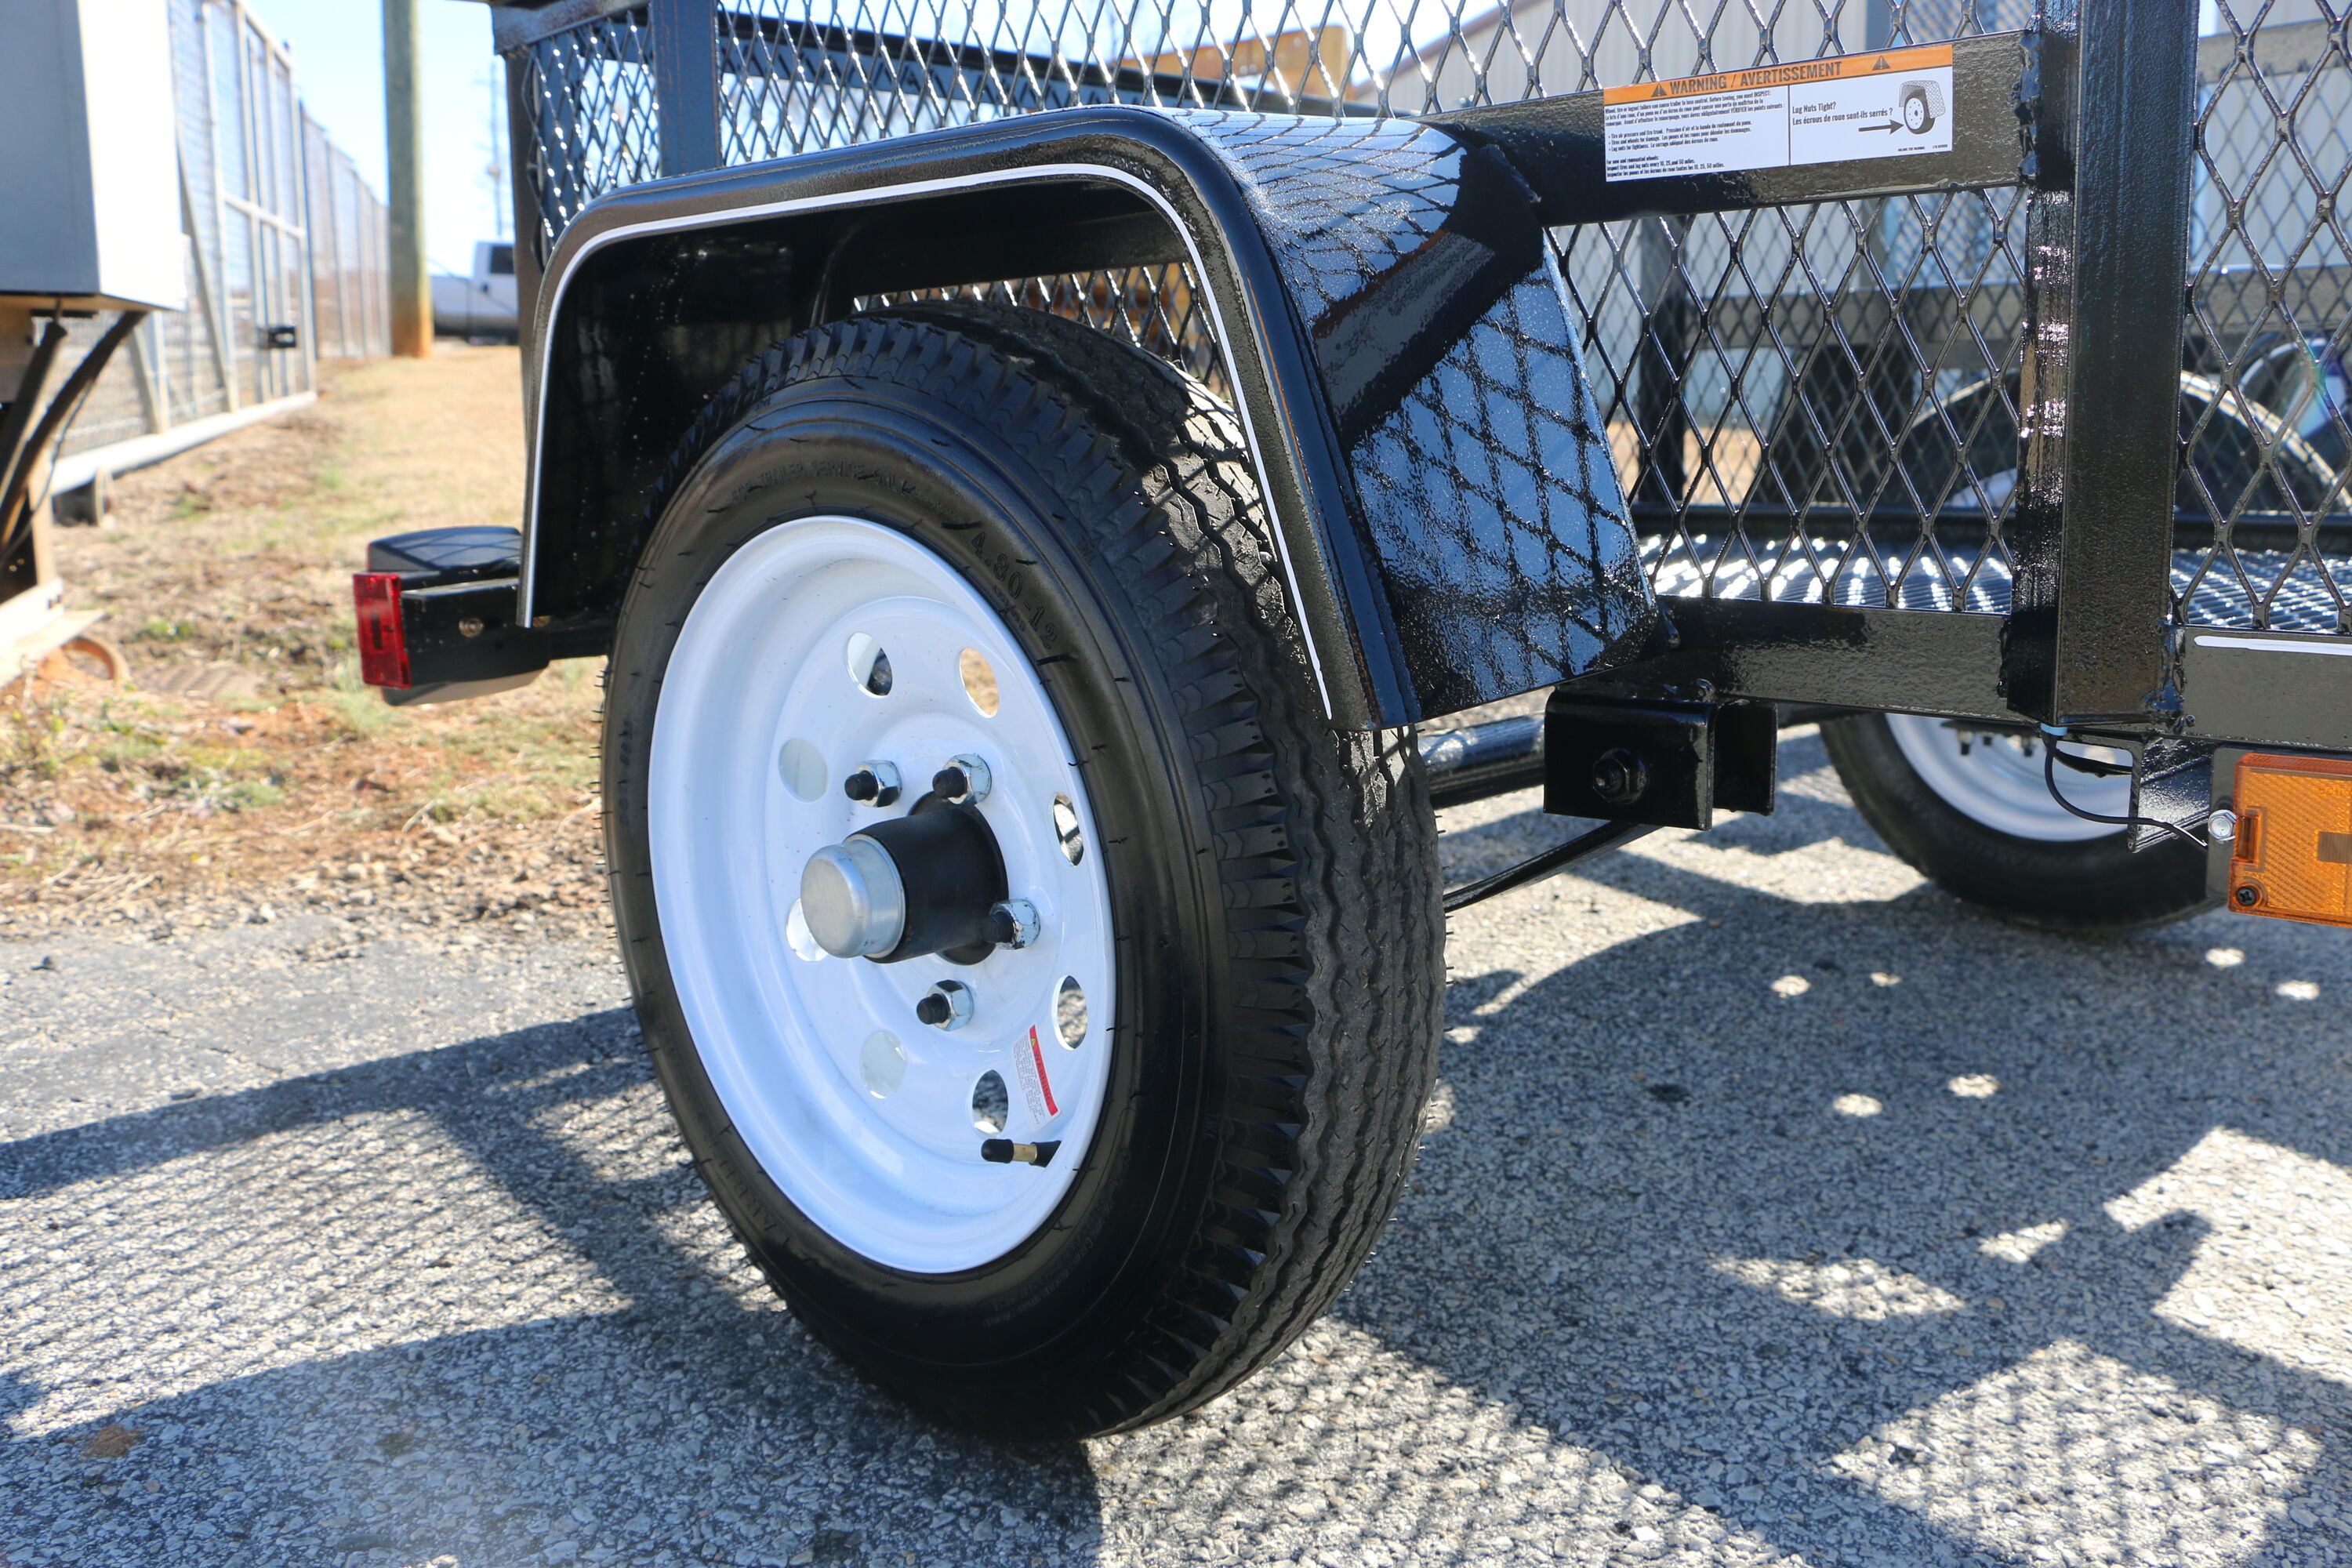 Carry-On Trailer 5.5-ft x 9-ft Steel Mesh Utility Trailer with Ramp Gate  (2440-lb Capacity) in the Utility Trailers department at